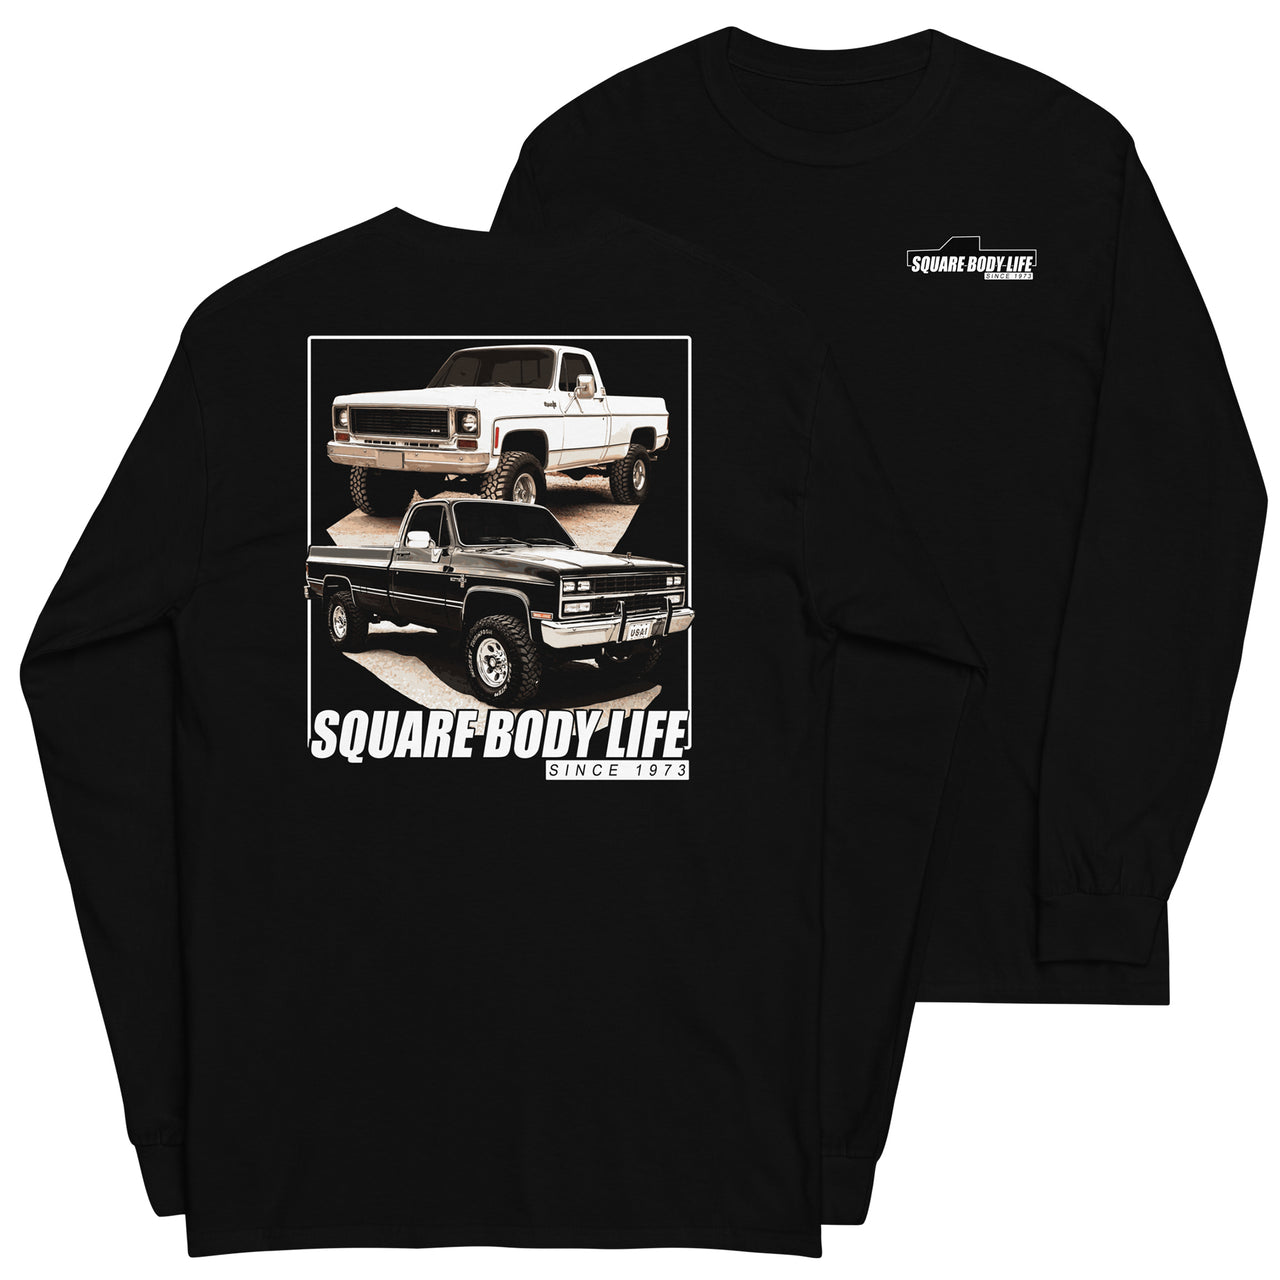 Square Body Life Long Sleeve T-Shirt in black